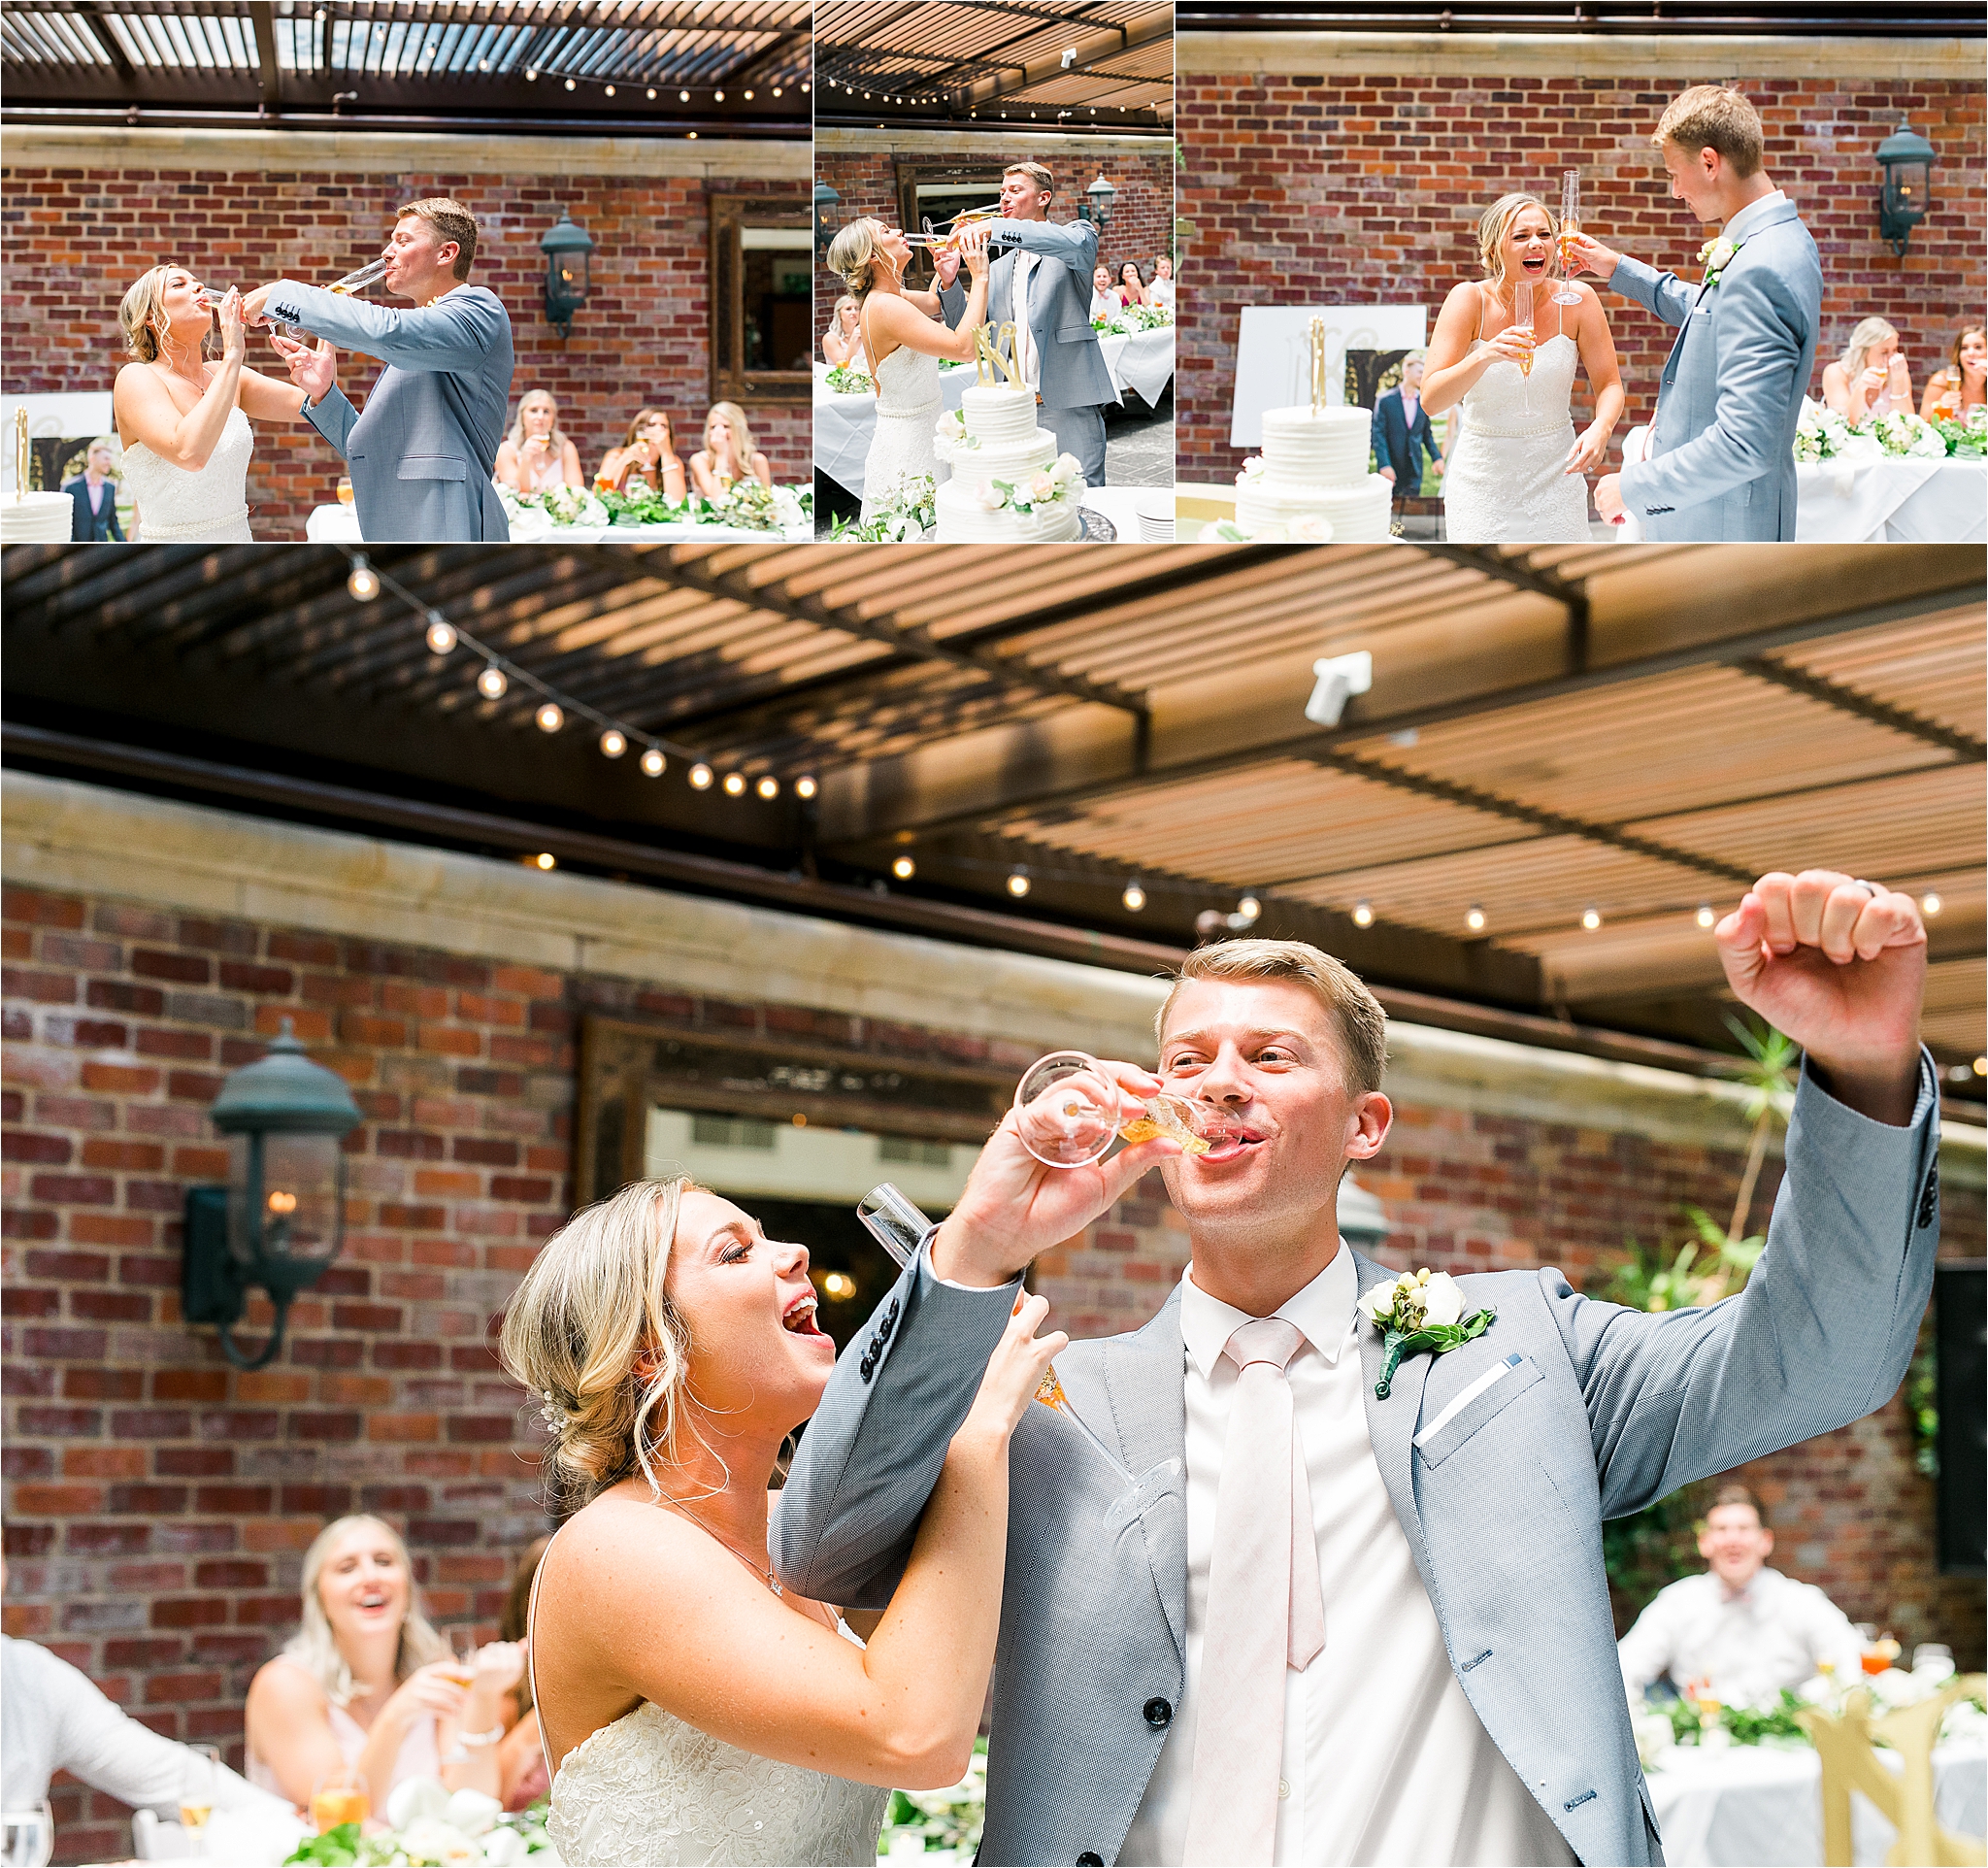 A couple shares Champagne at their classic, garden Dallas wedding reception at III Forks